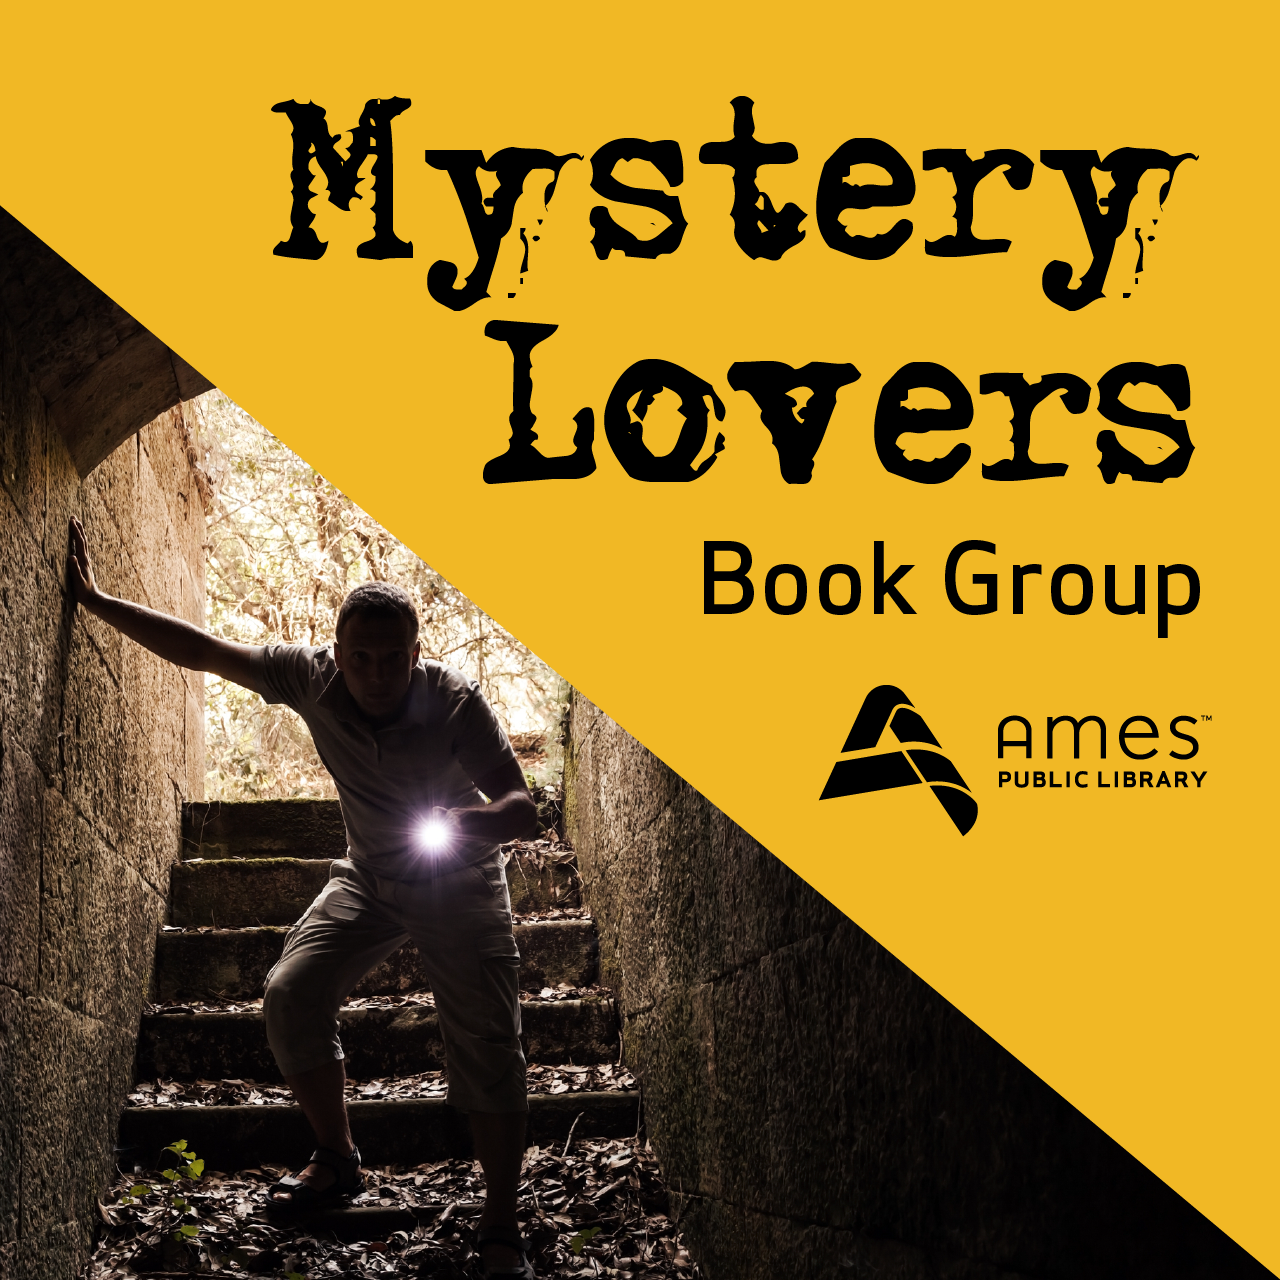 Mystery Lovers Book Group